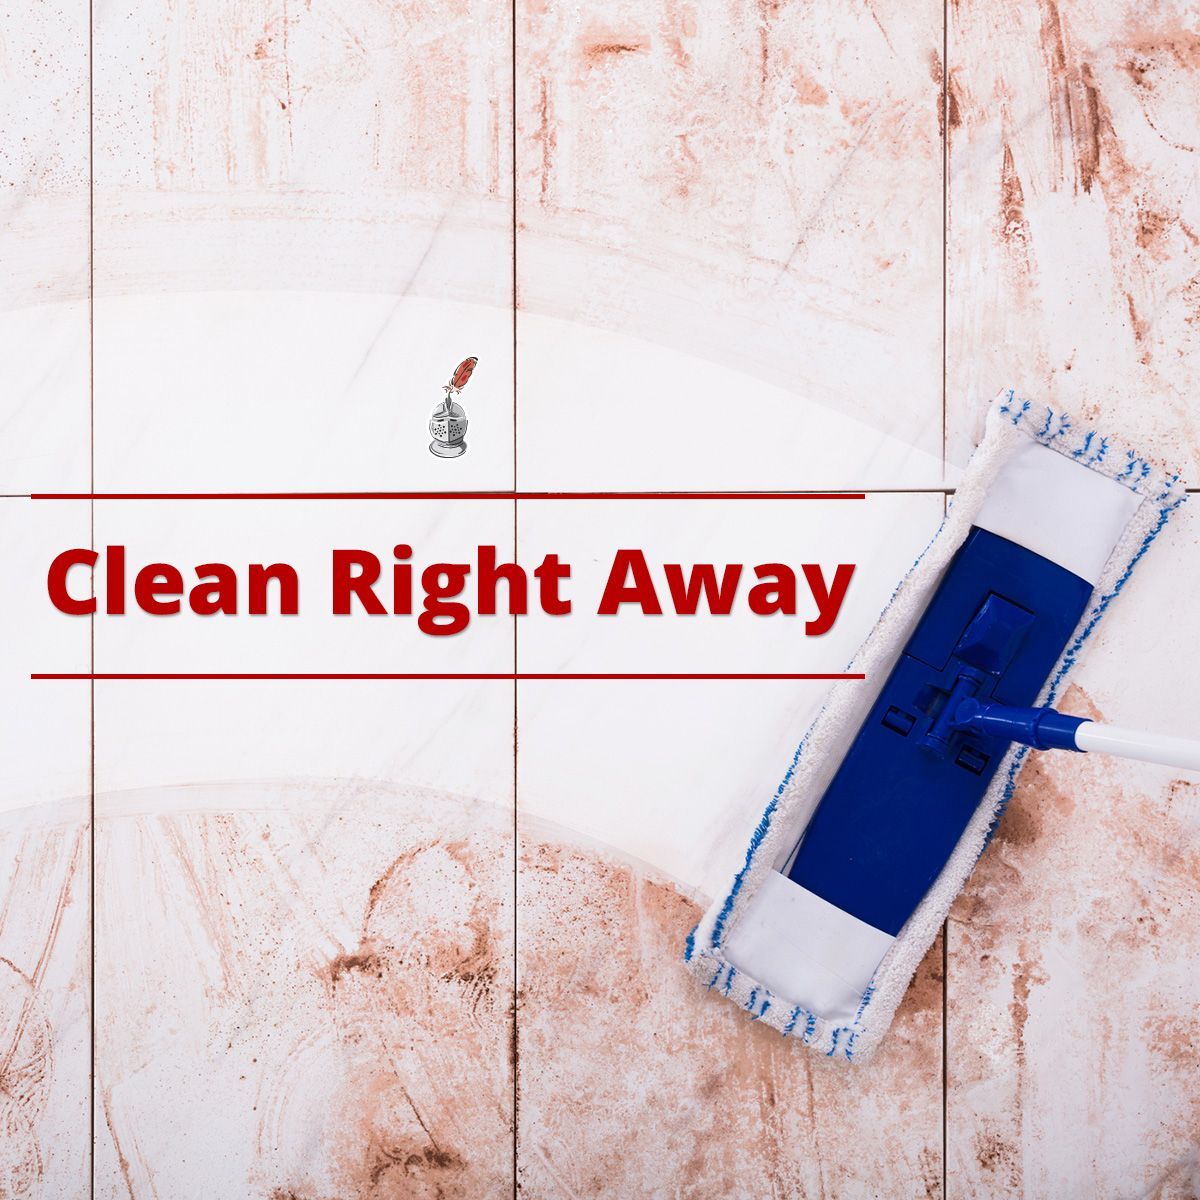 Clean Right Away